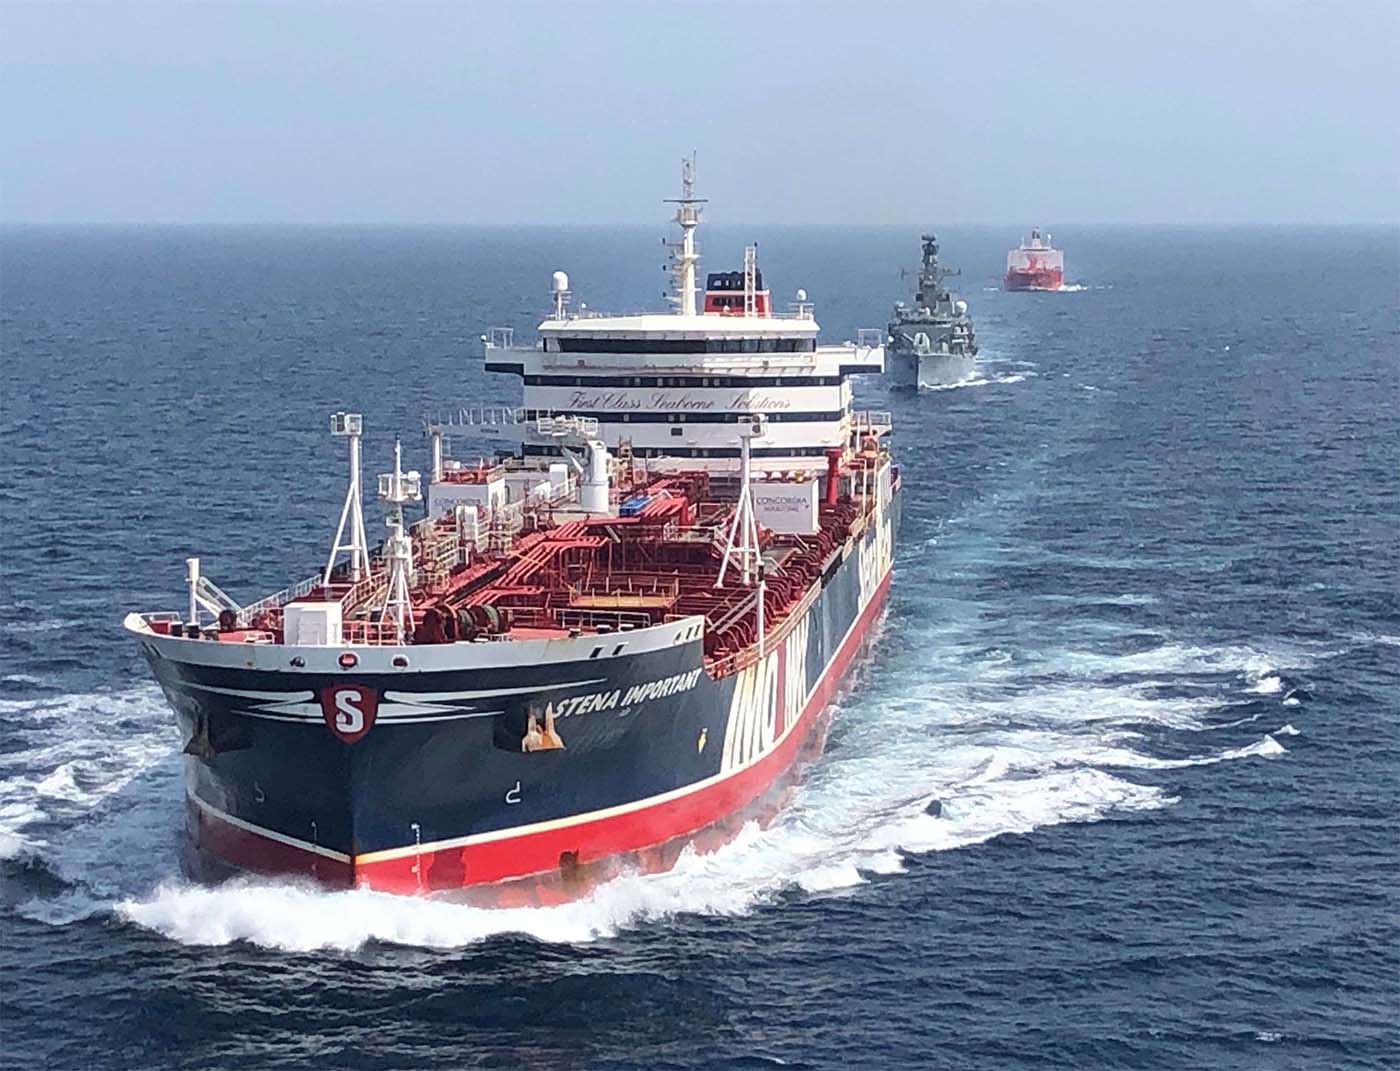 The US formed the coalition after attacks on oil tankers that American officials blame on Iran